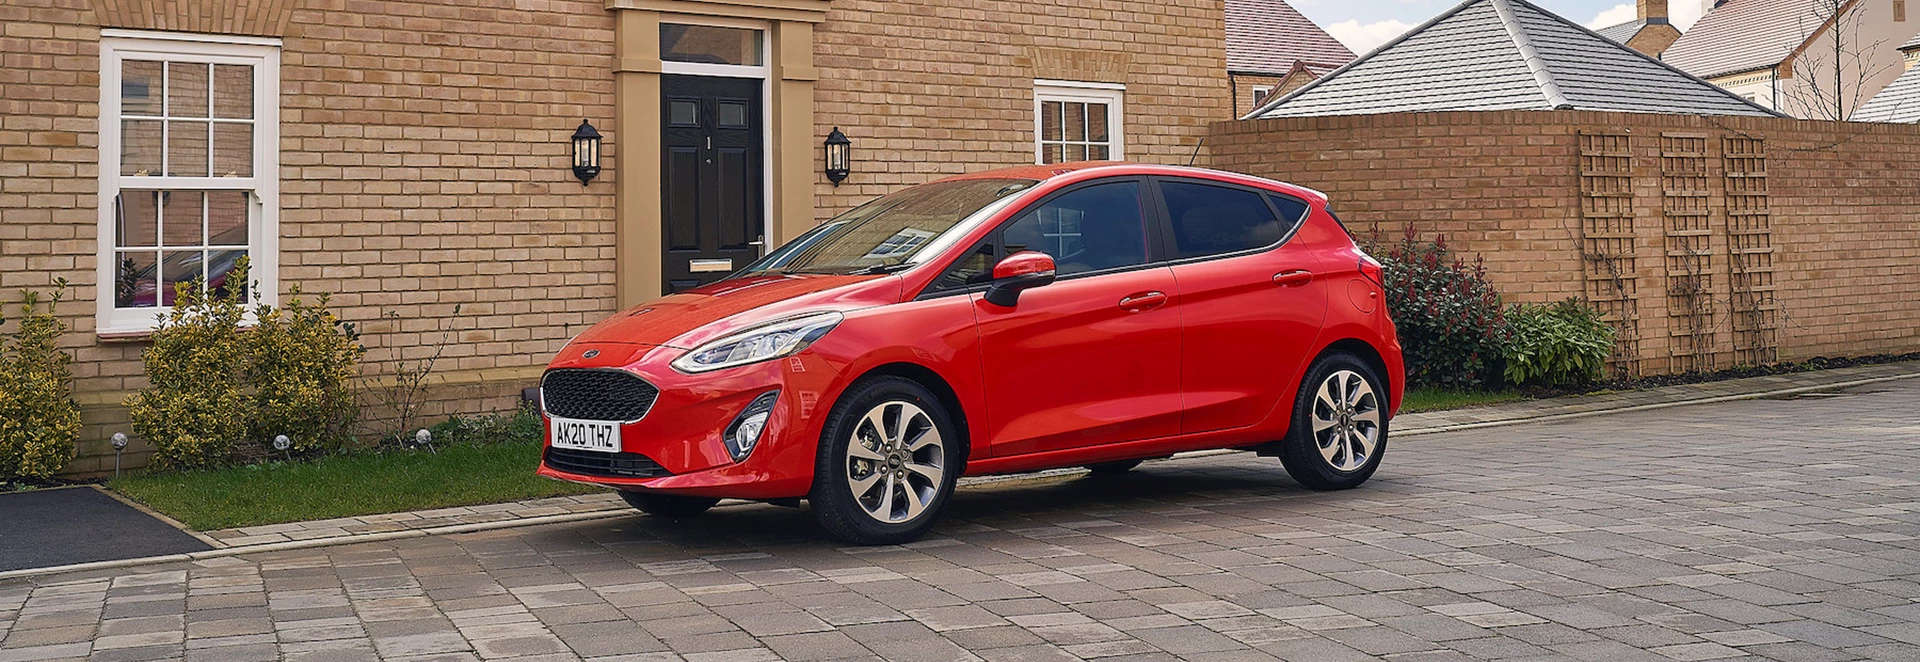 5 new cars you can get for £200 per month 